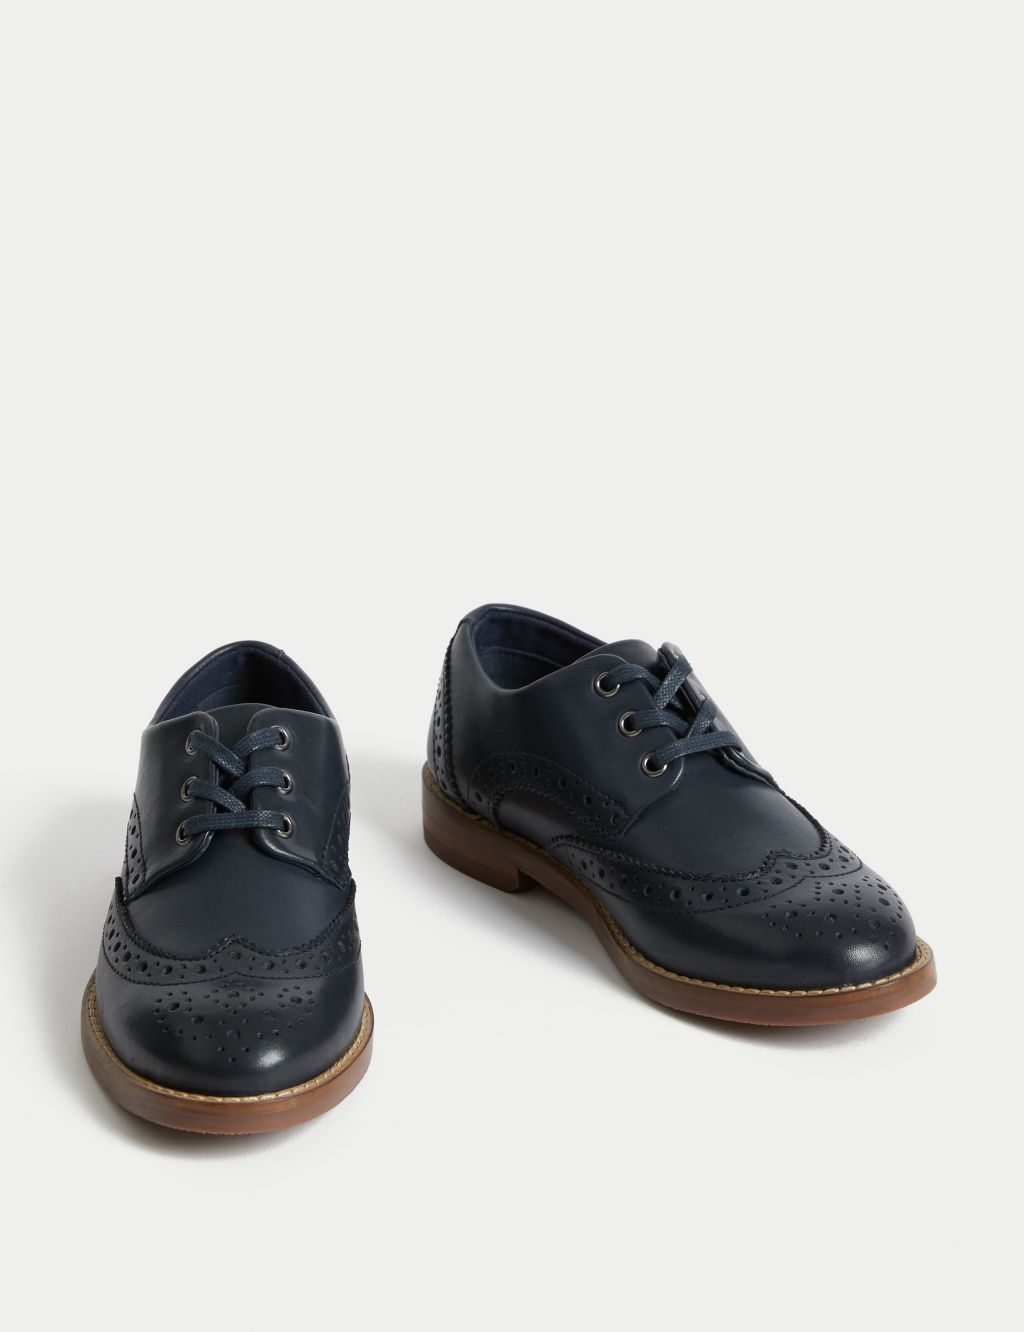 Kids' Leather Brogues (8 Smal l - 2 Large) image 2